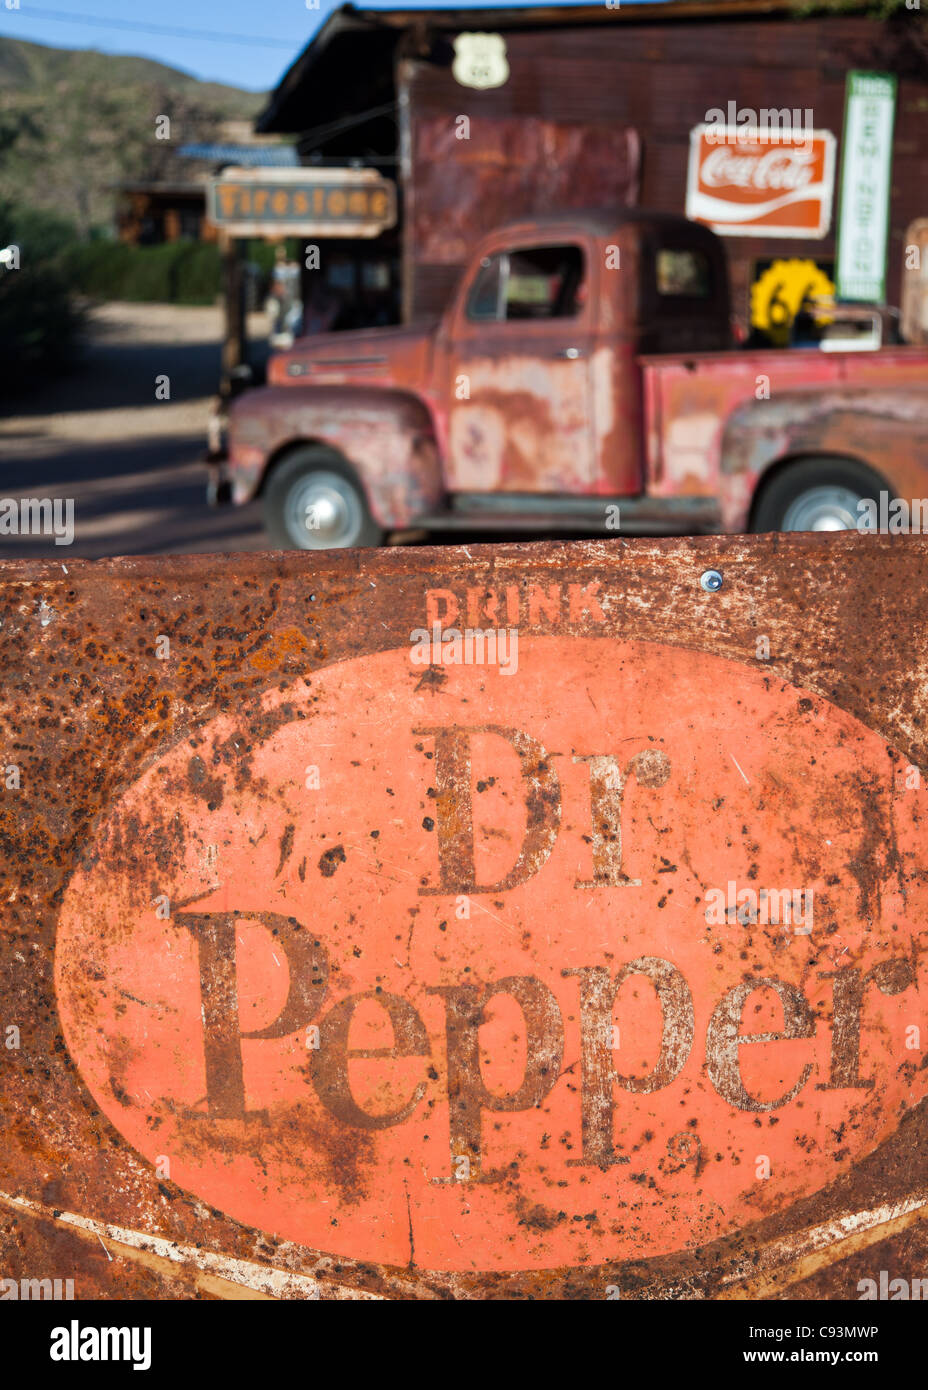 Old rusty Dr Pepper sign in the foreground with a vintage truck in the background outside Hackberry General Store on historic Route 66, Arizona, USA Stock Photo